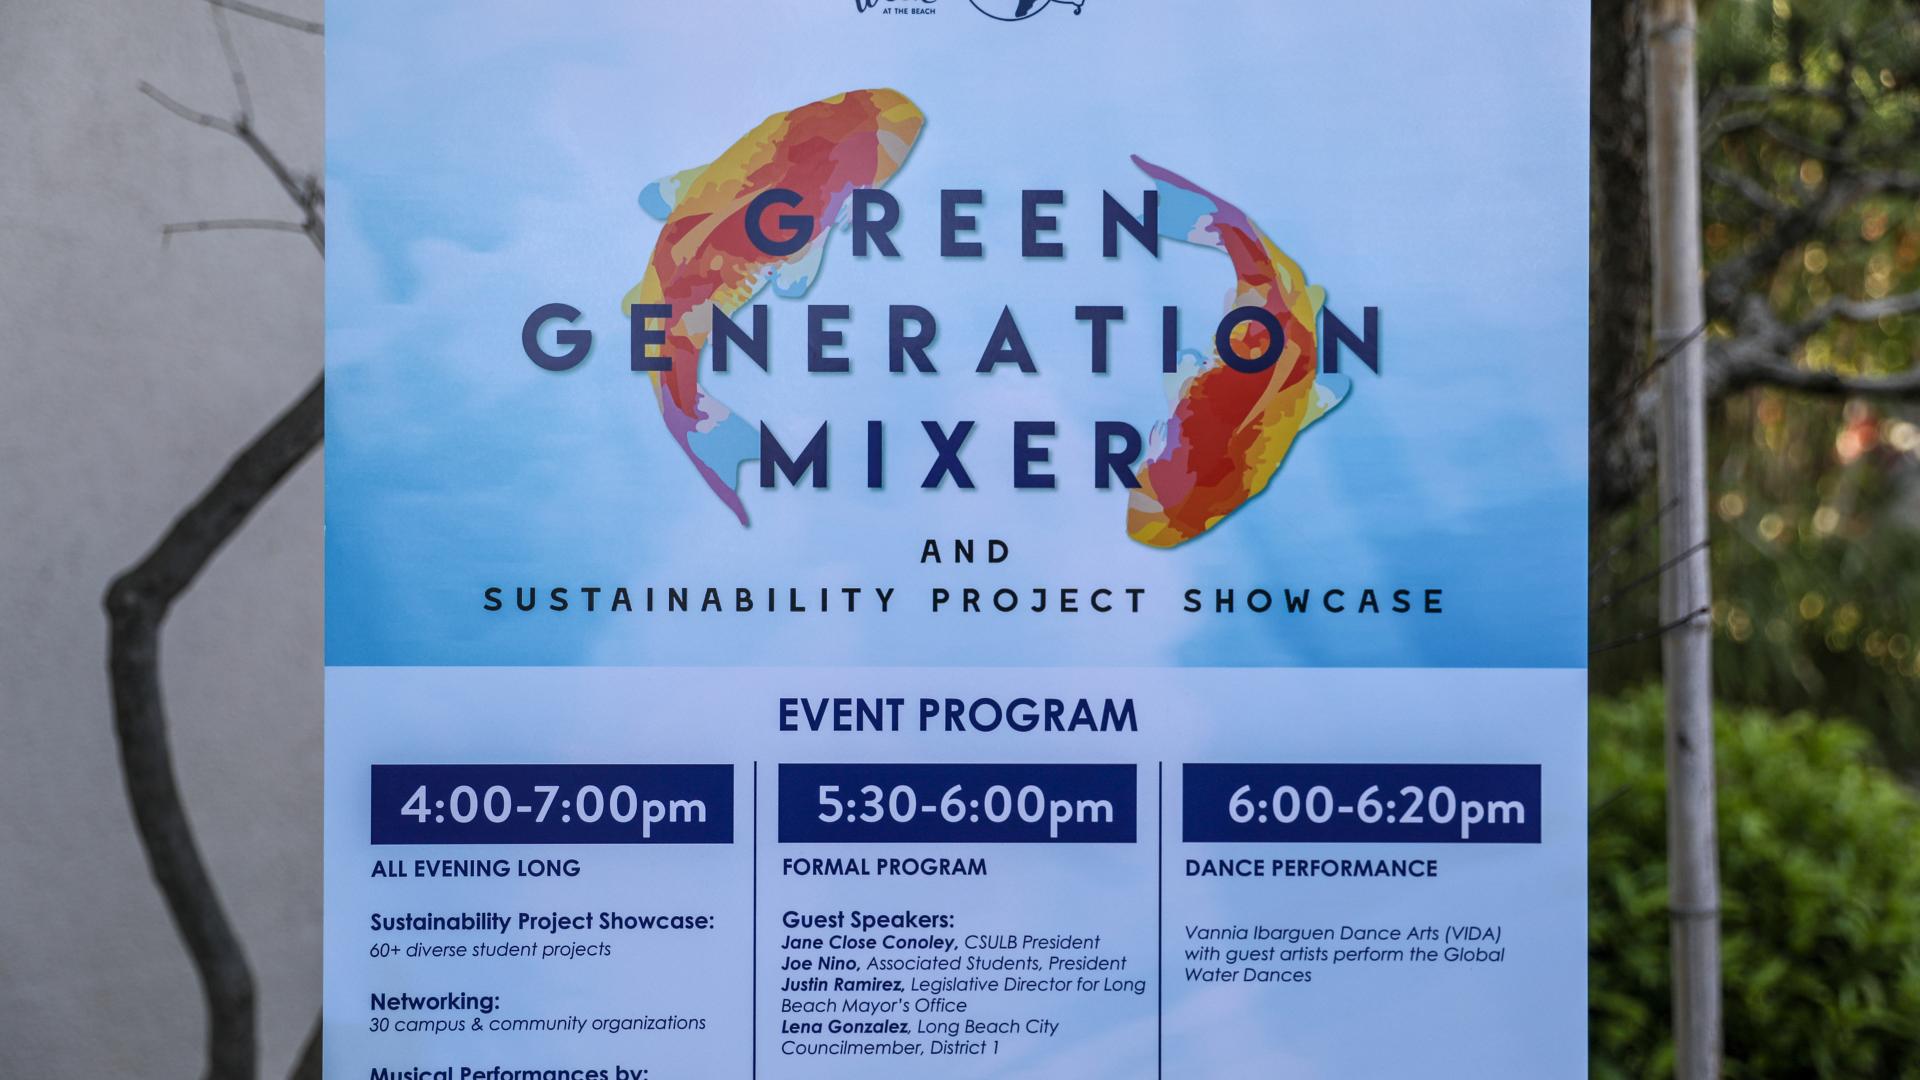 CSULB Green Generation Mixer and Sustainability Project Showcase - Flyer